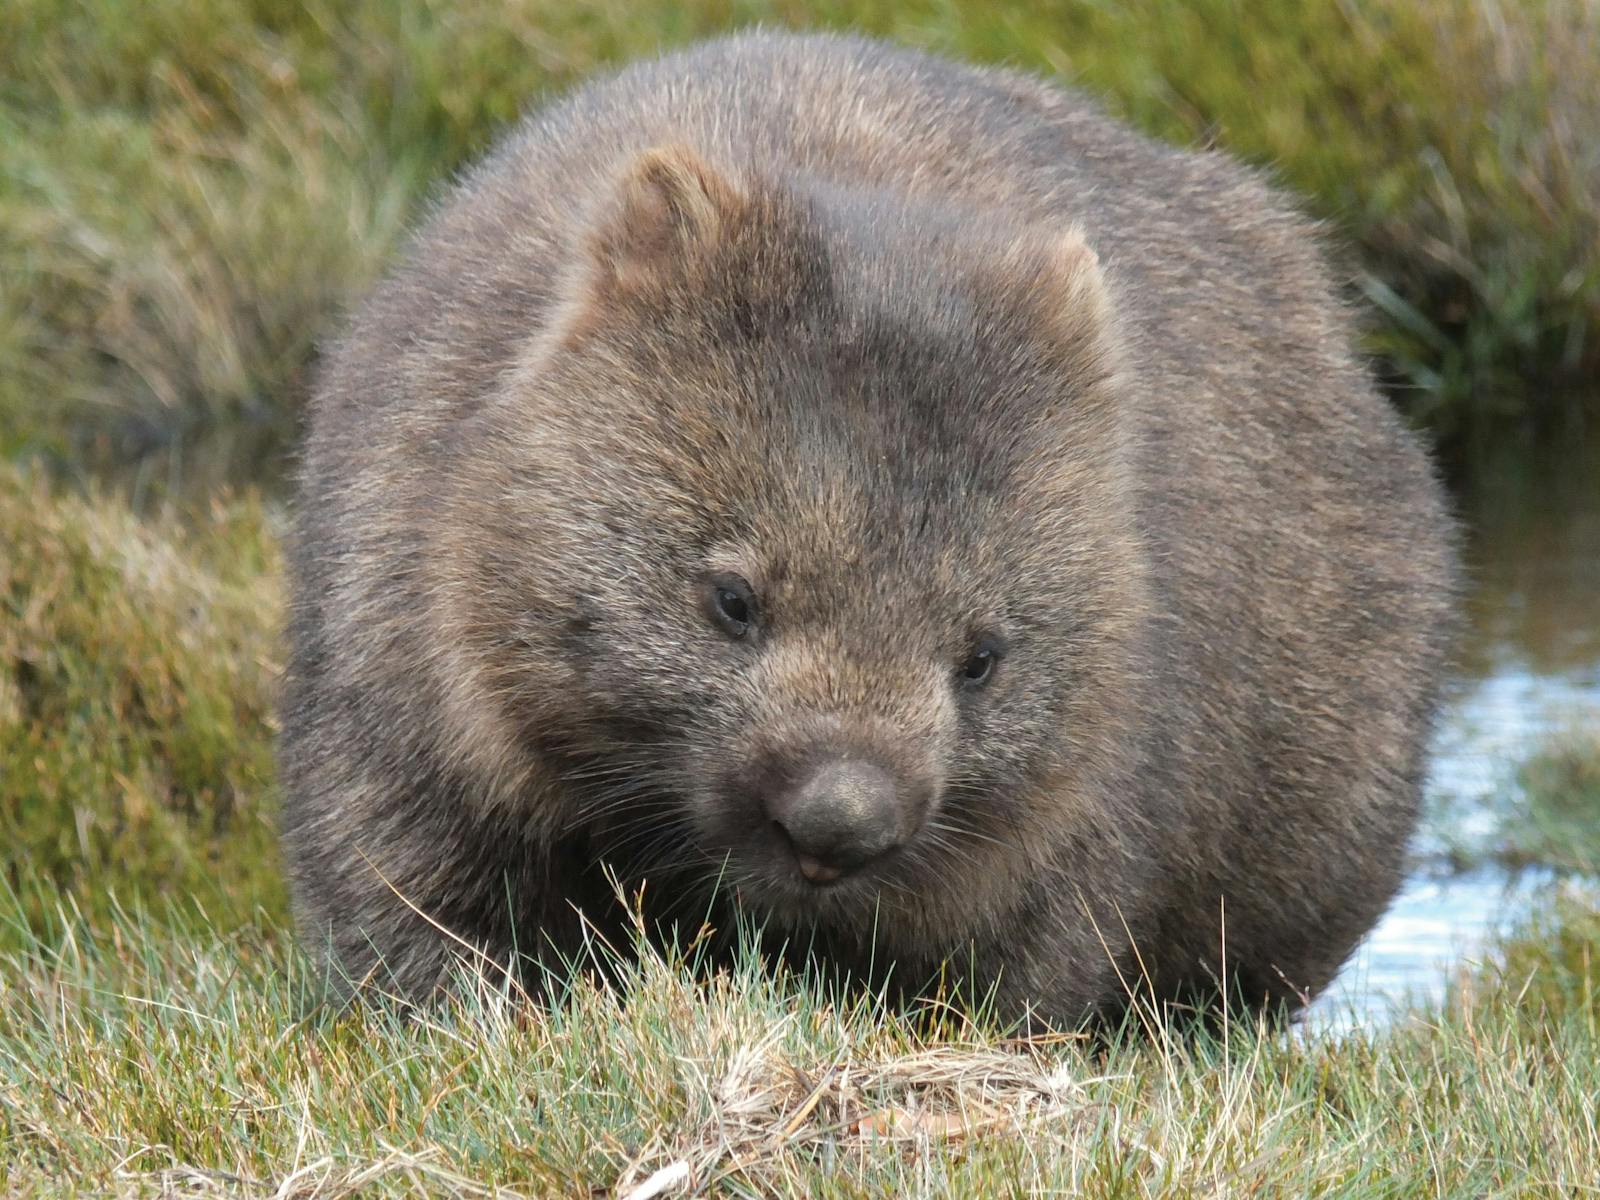 Wombat in Cradle Mountain National Park